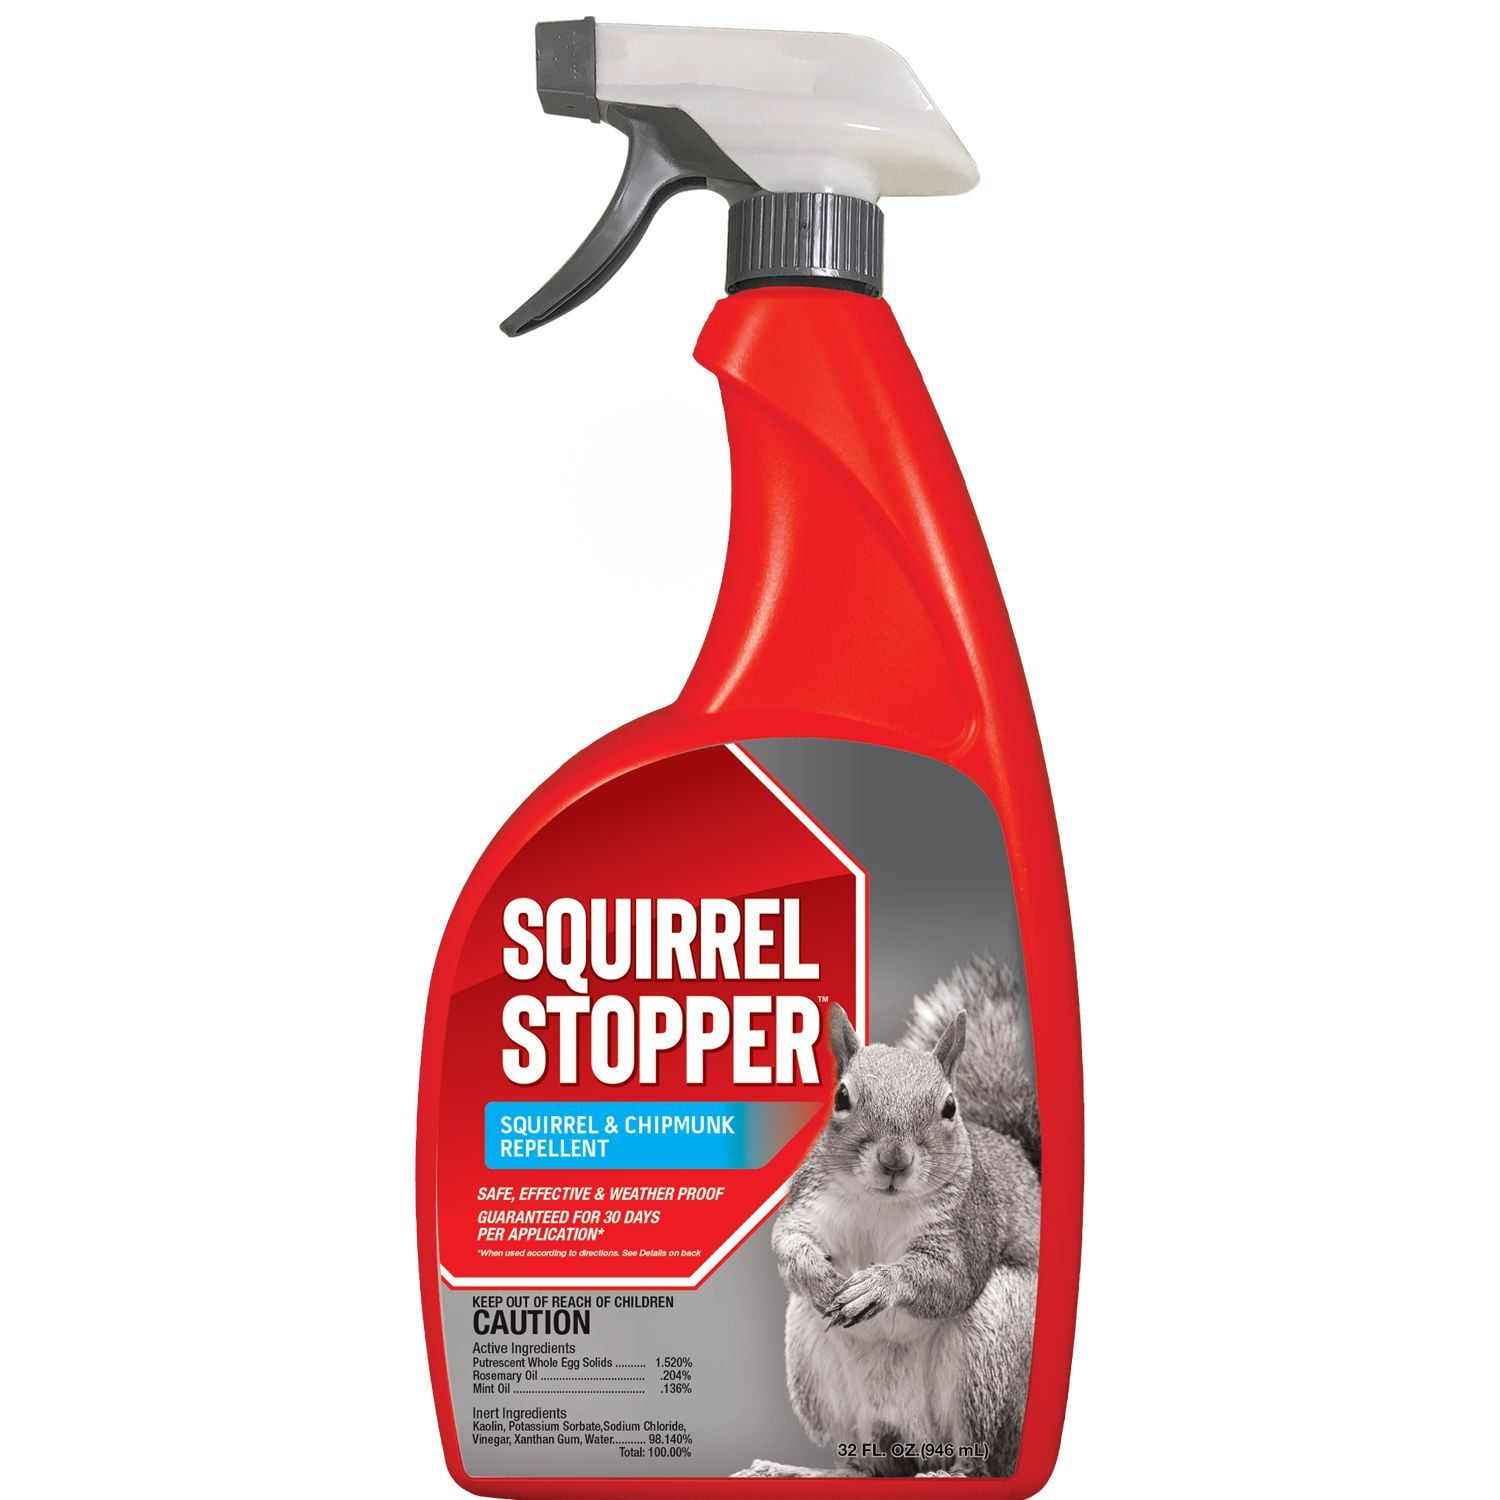 Messinas Squirrel Stopper Animal Repellent, 32oz Trigger Ready tp Use, Repels Squirrels and Chipmunks